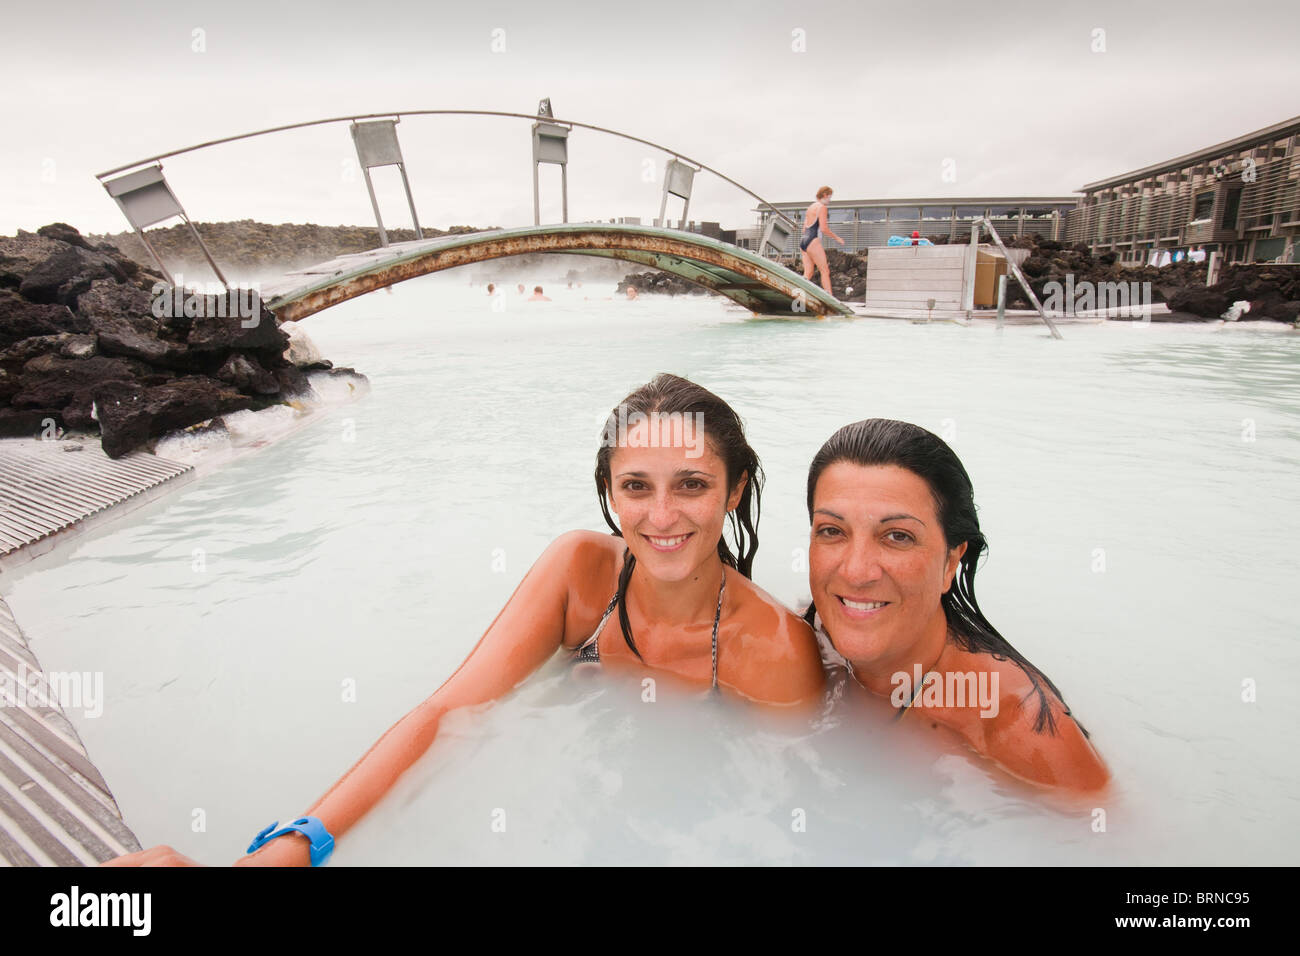 Two Spanish ladies relaxing at the Blue Lagoon near at Keflavik in Iceland. Stock Photo